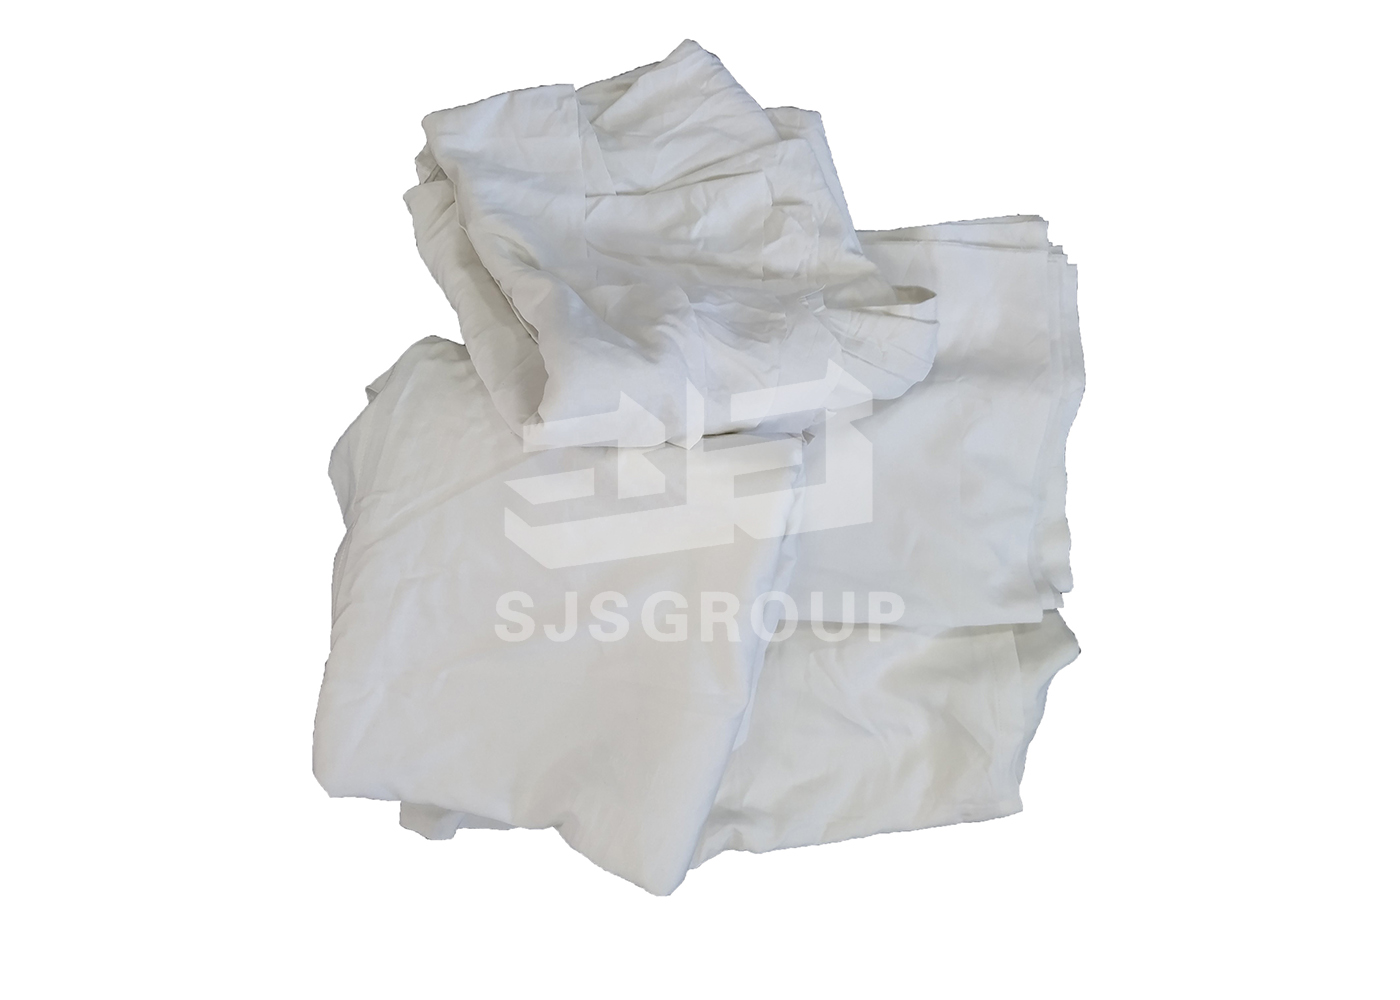 BAG OF COTTON RAGS | Products | The Cotton Rag Company Taicang Daorong ...